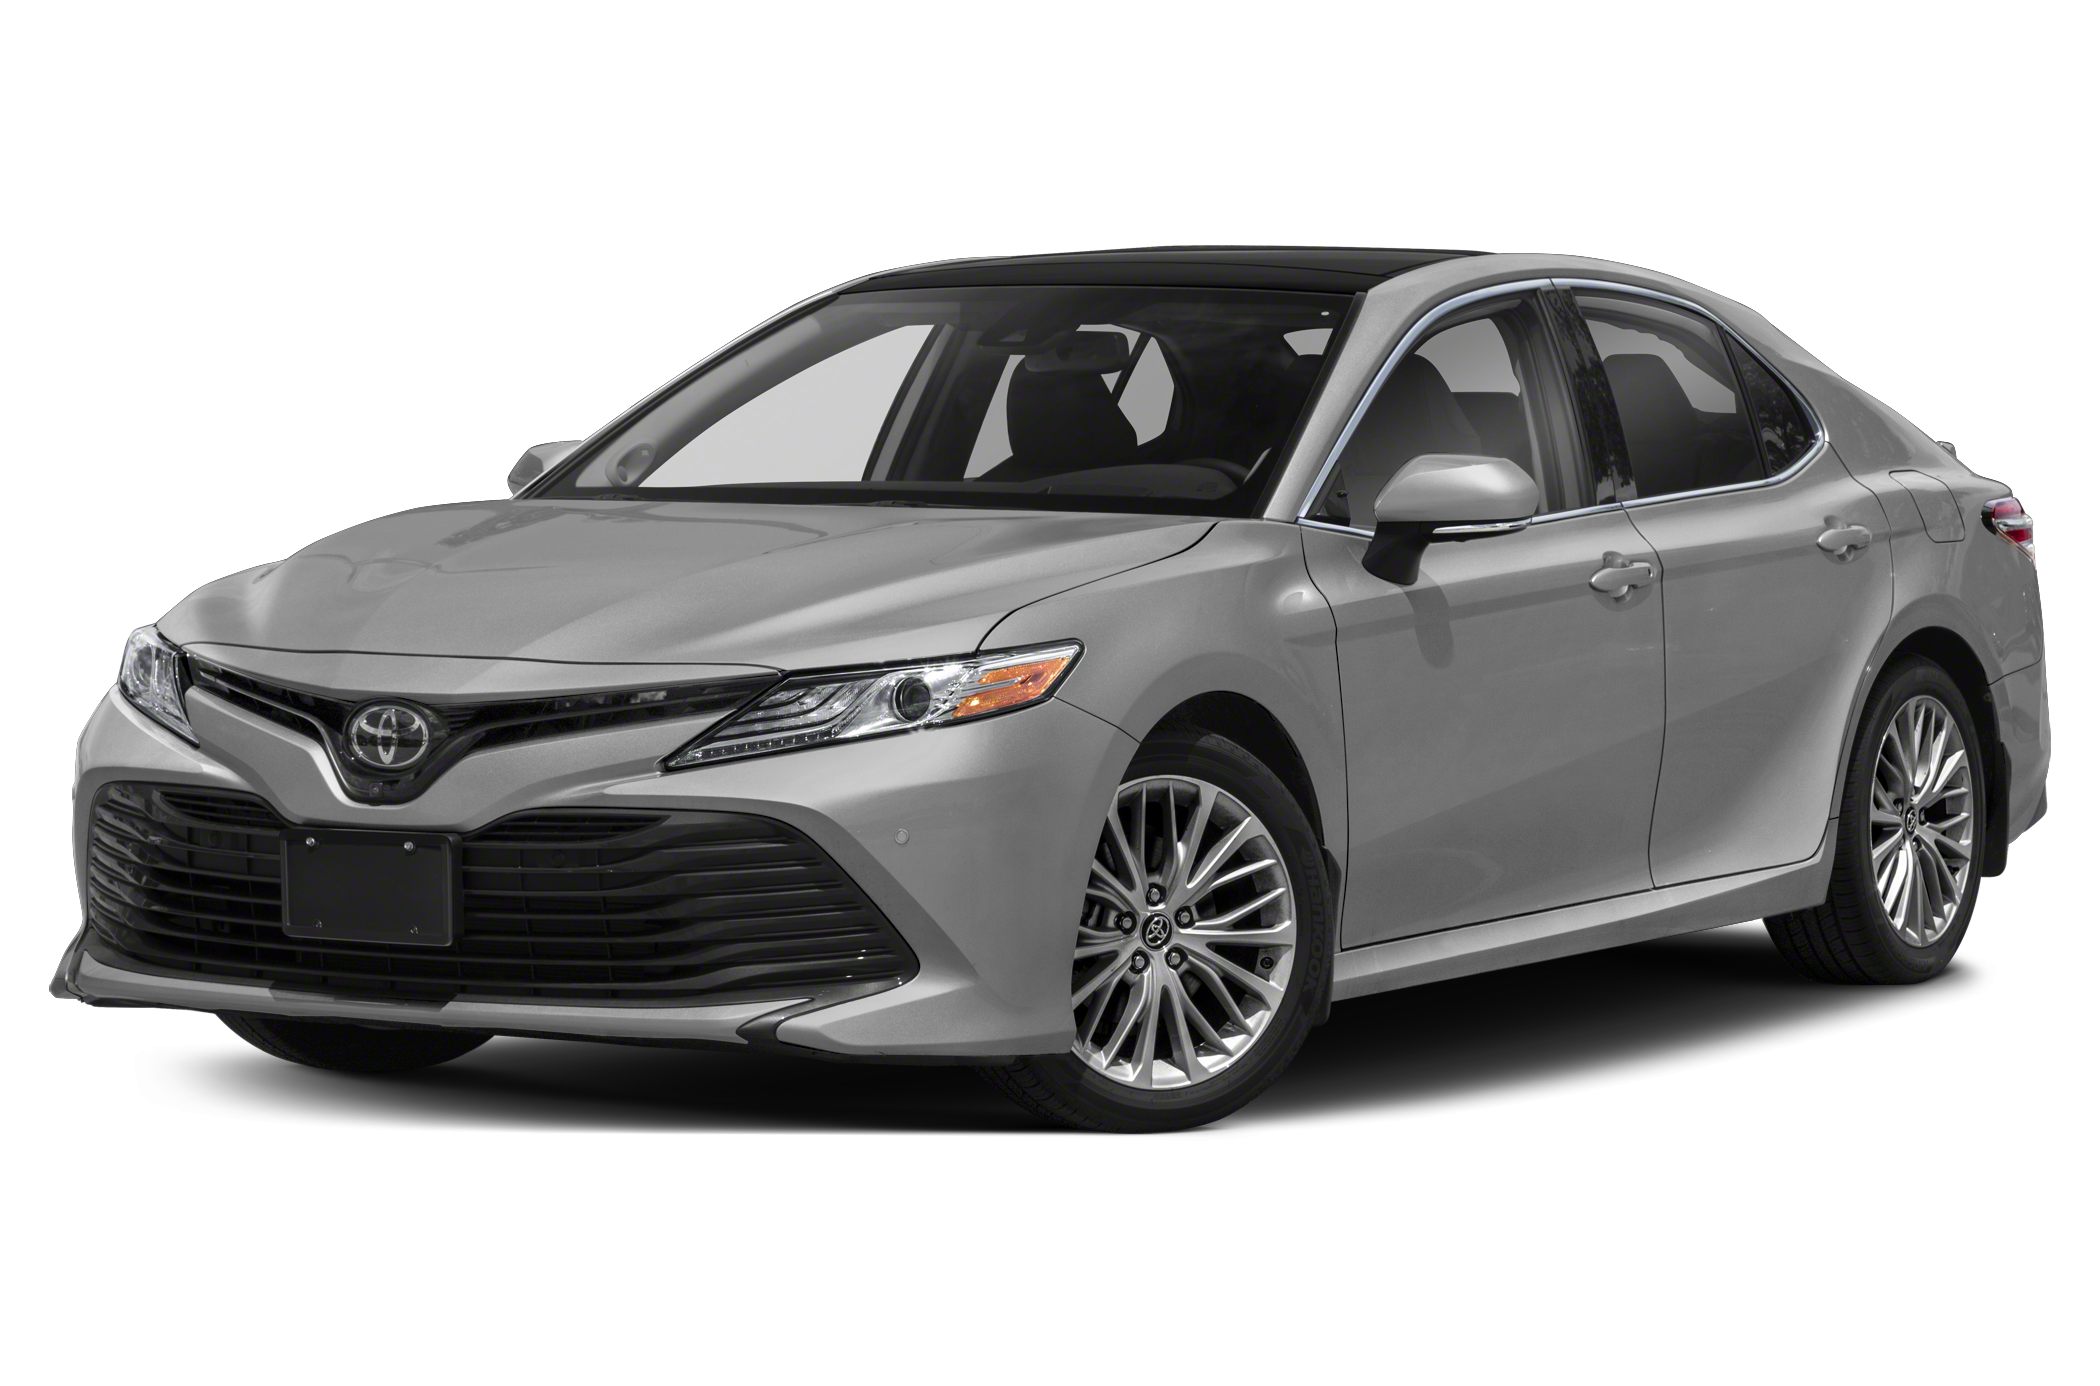 2019 Toyota Camry oem parts and accessories on sale